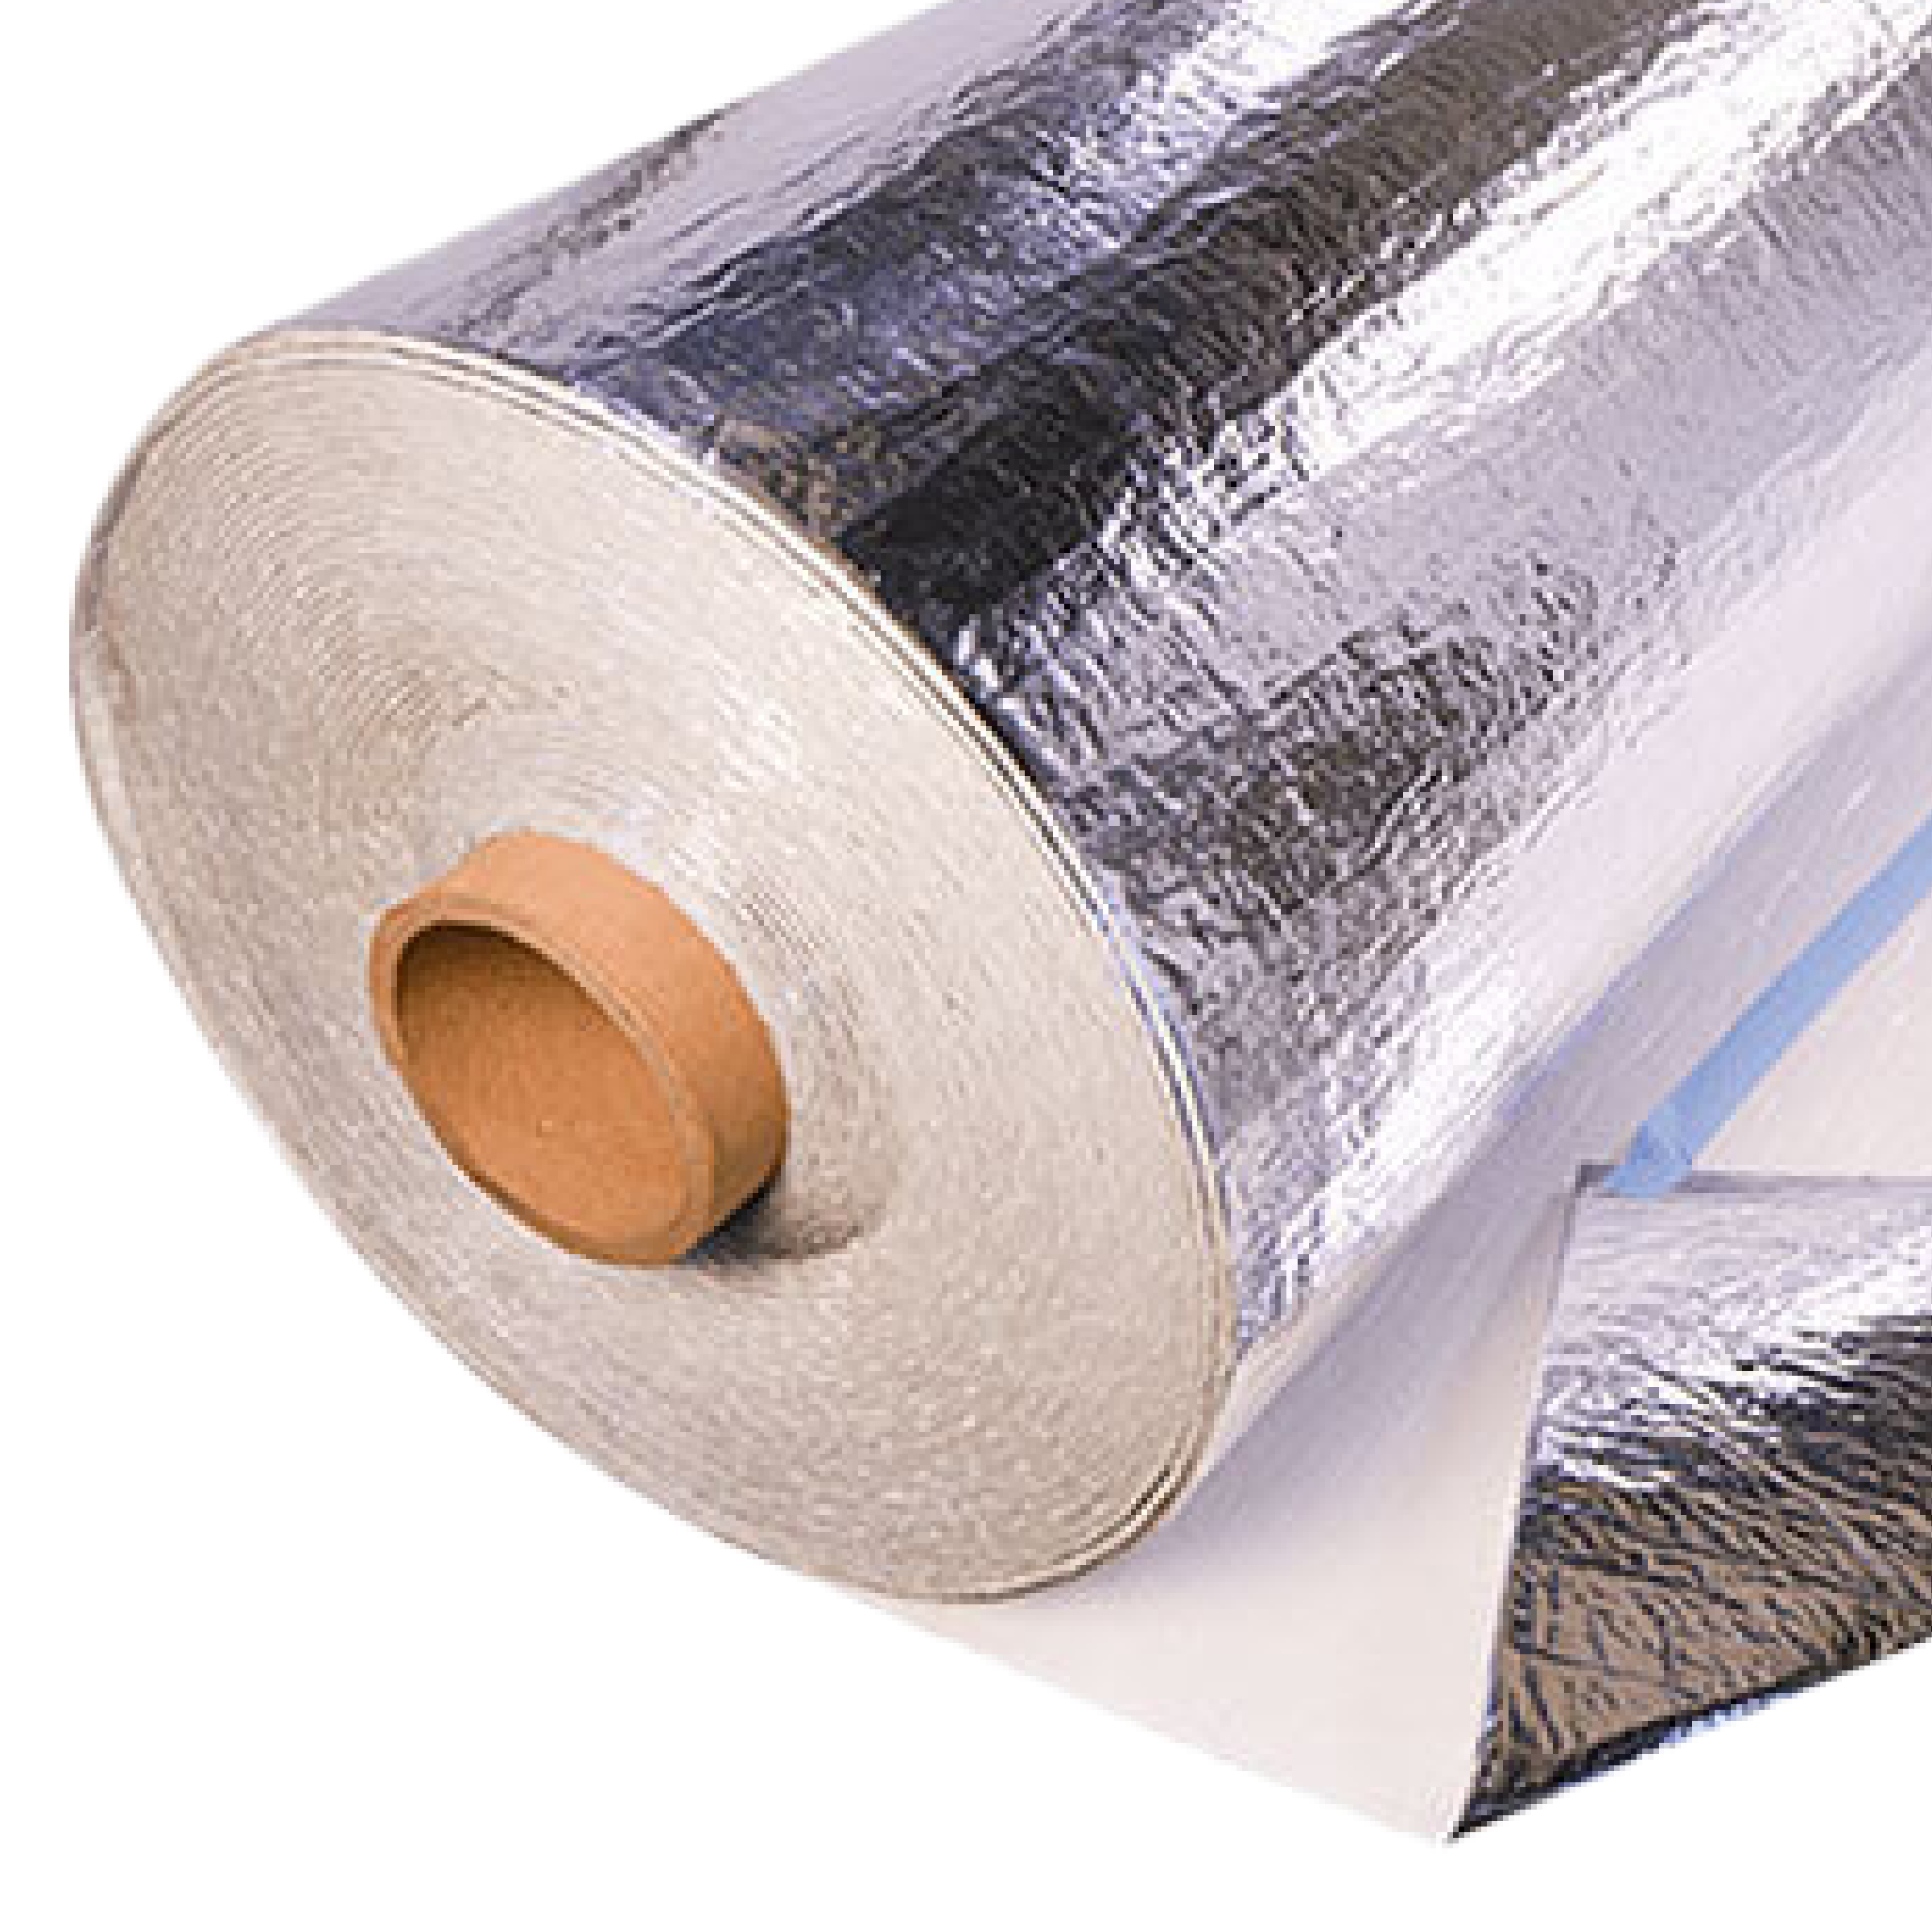 Reliable and Woven Flexible Thermal Insulation Waterproof Material 